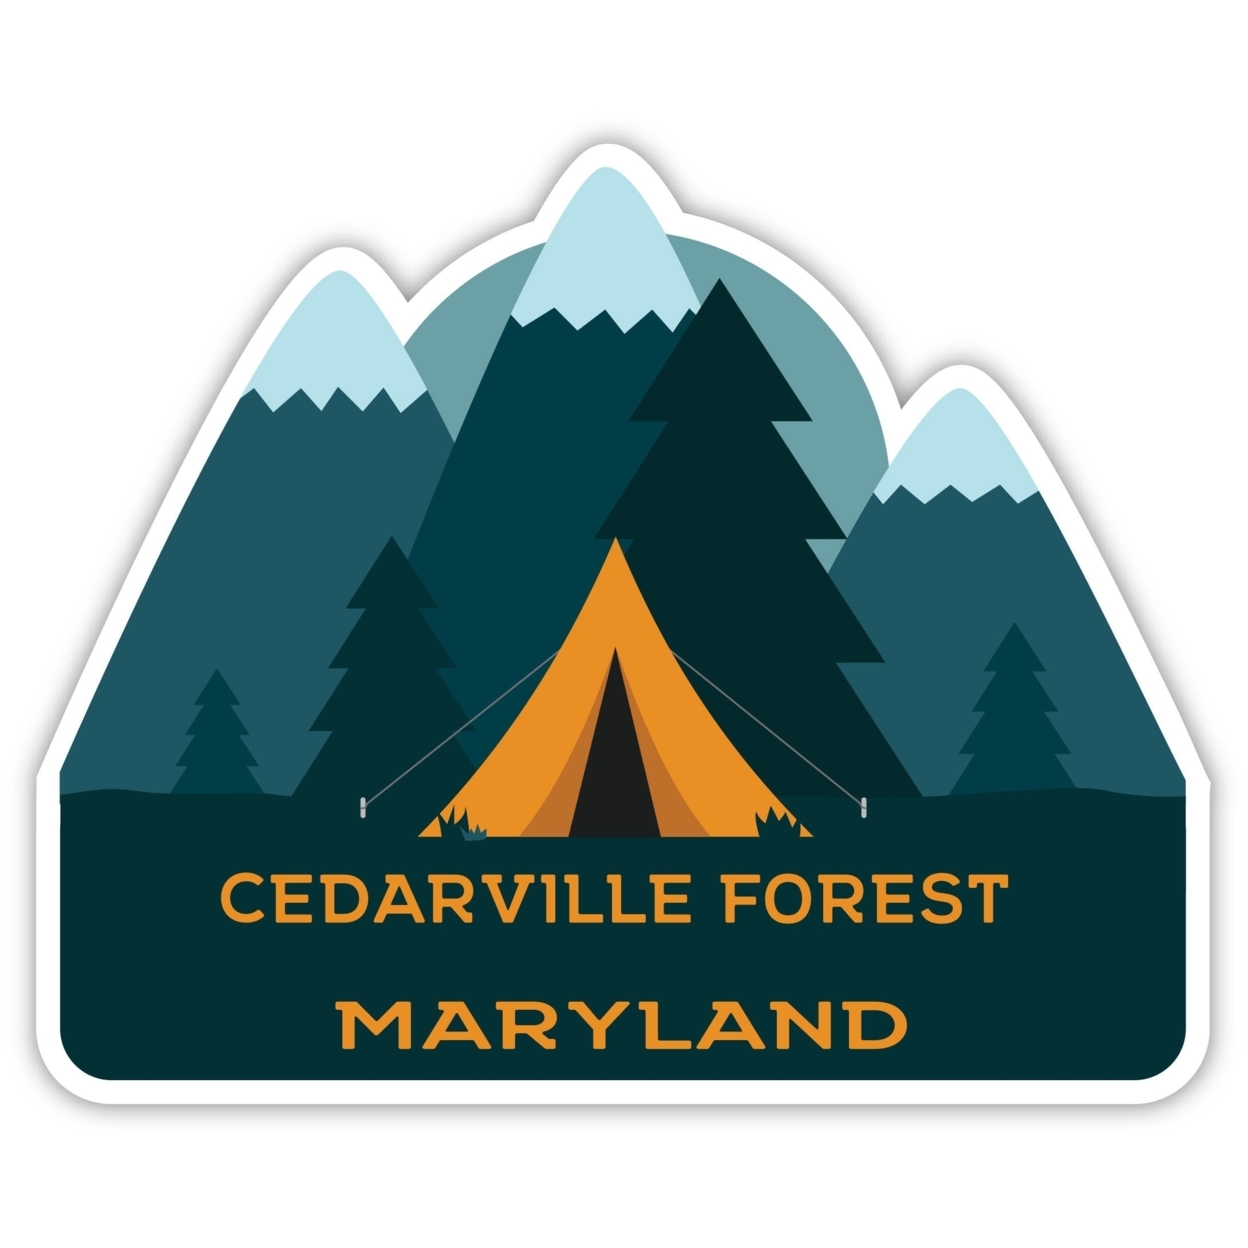 Cedarville Forest Maryland Souvenir Decorative Stickers (Choose Theme And Size) - 4-Pack, 12-Inch, Tent